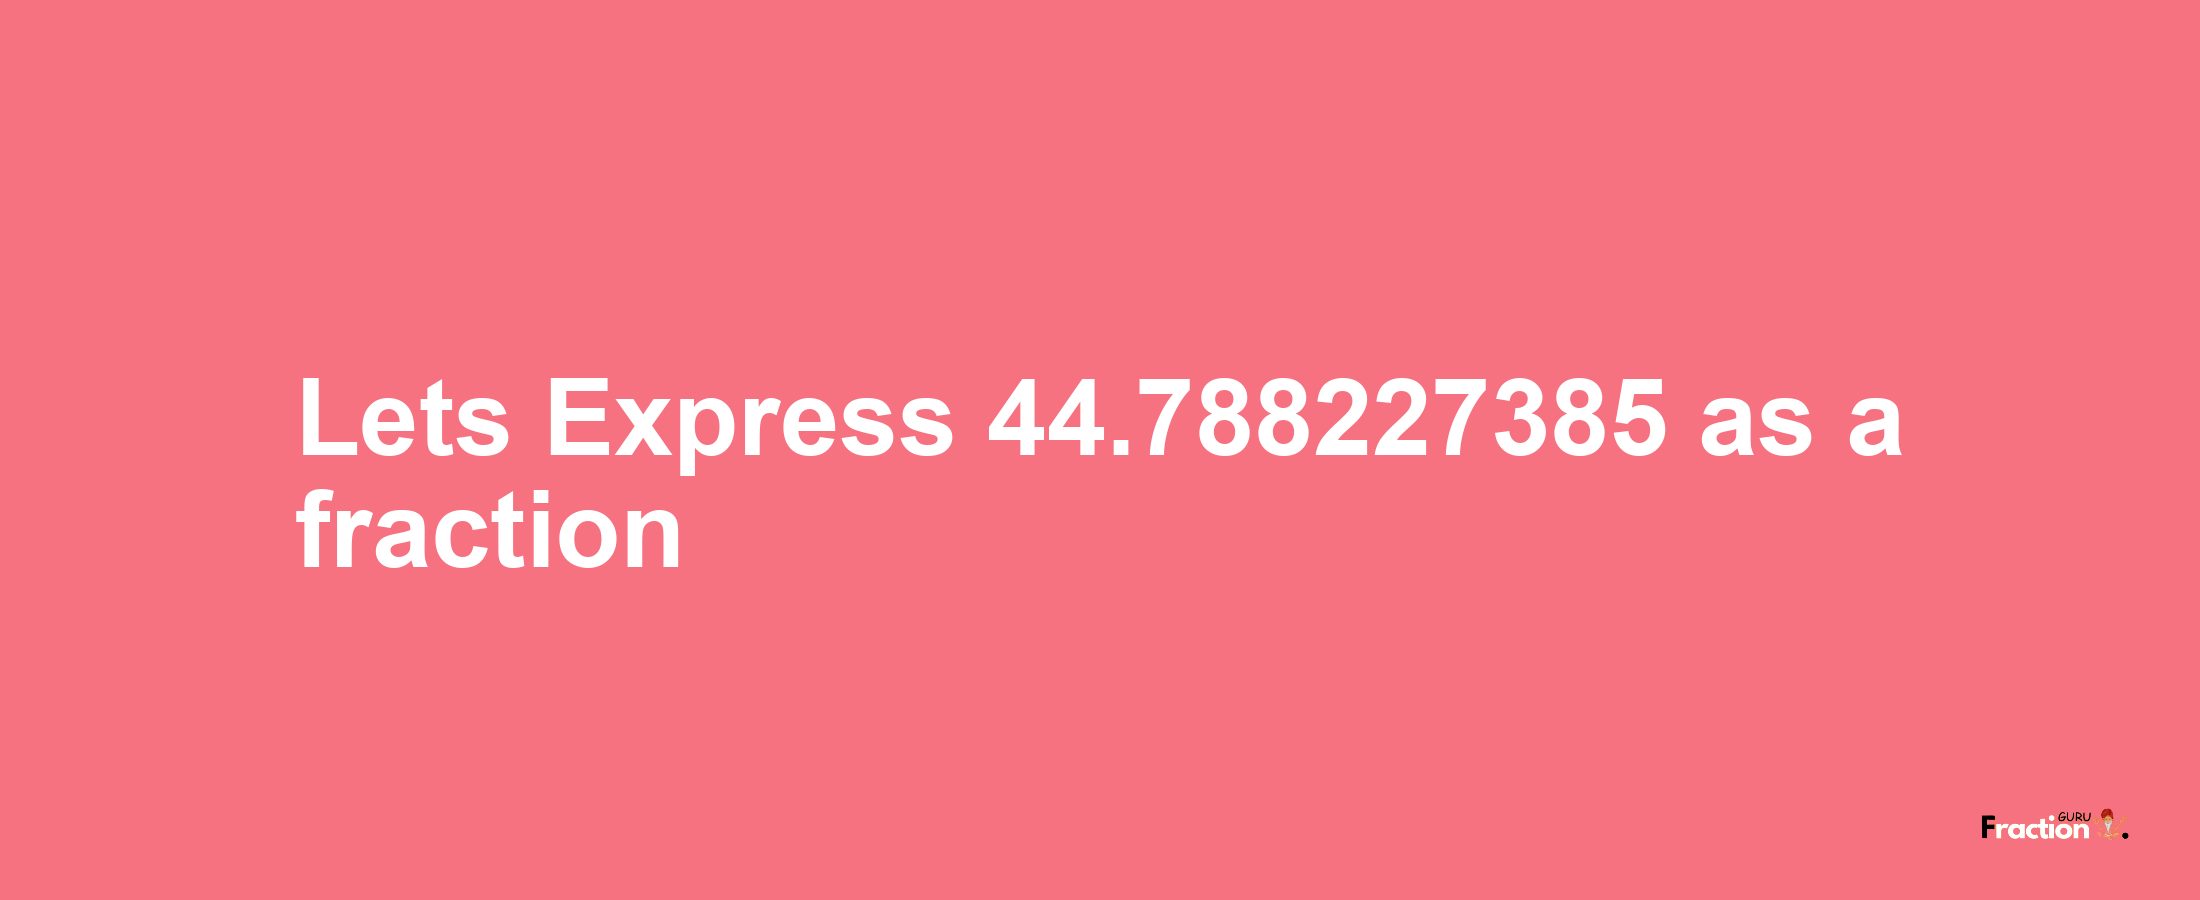 Lets Express 44.788227385 as afraction